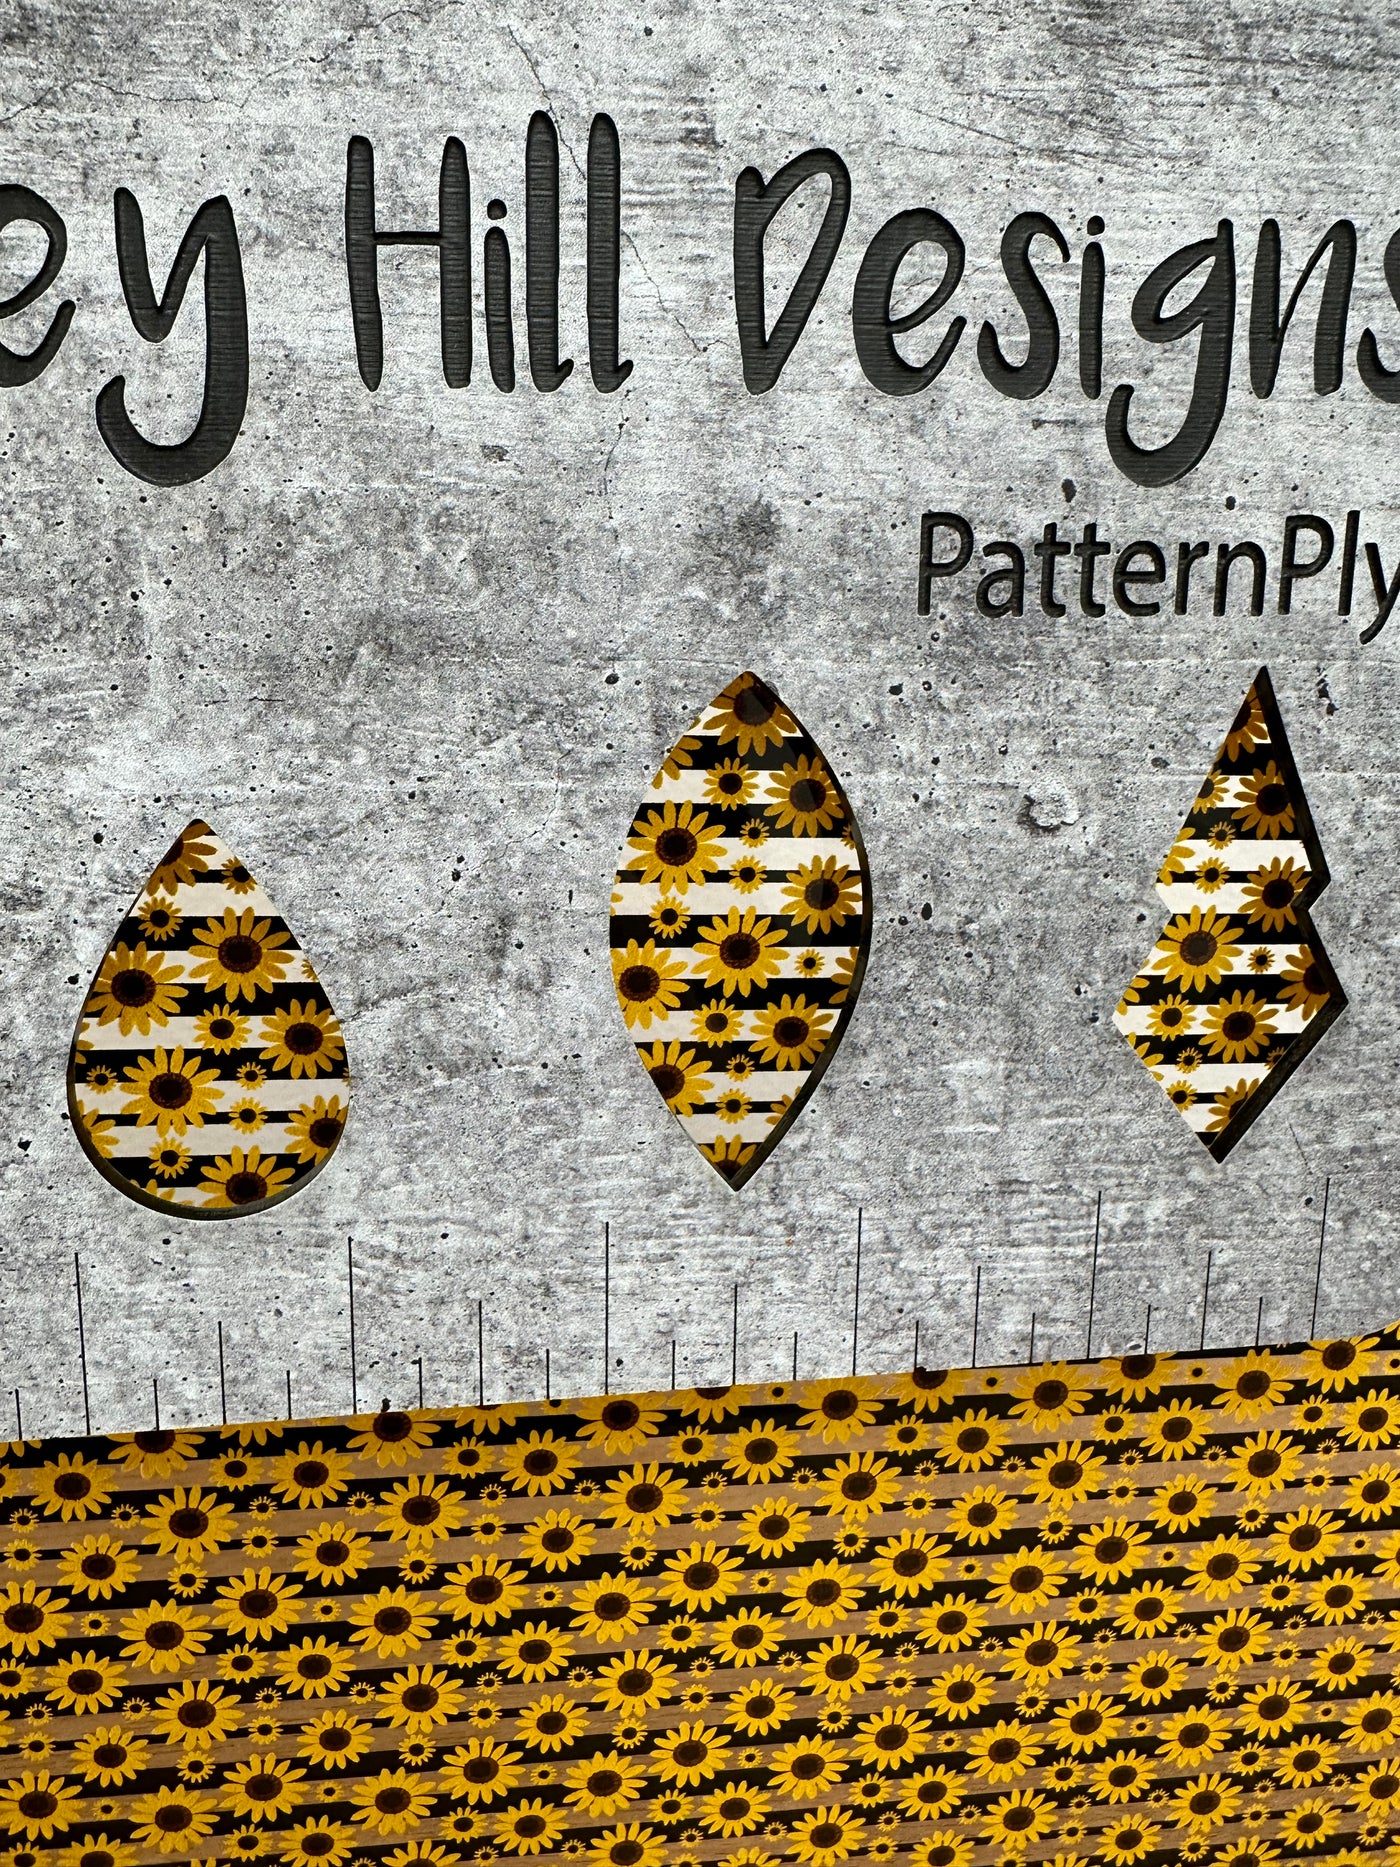 PatternPly® Scattered Sunflower Stripes